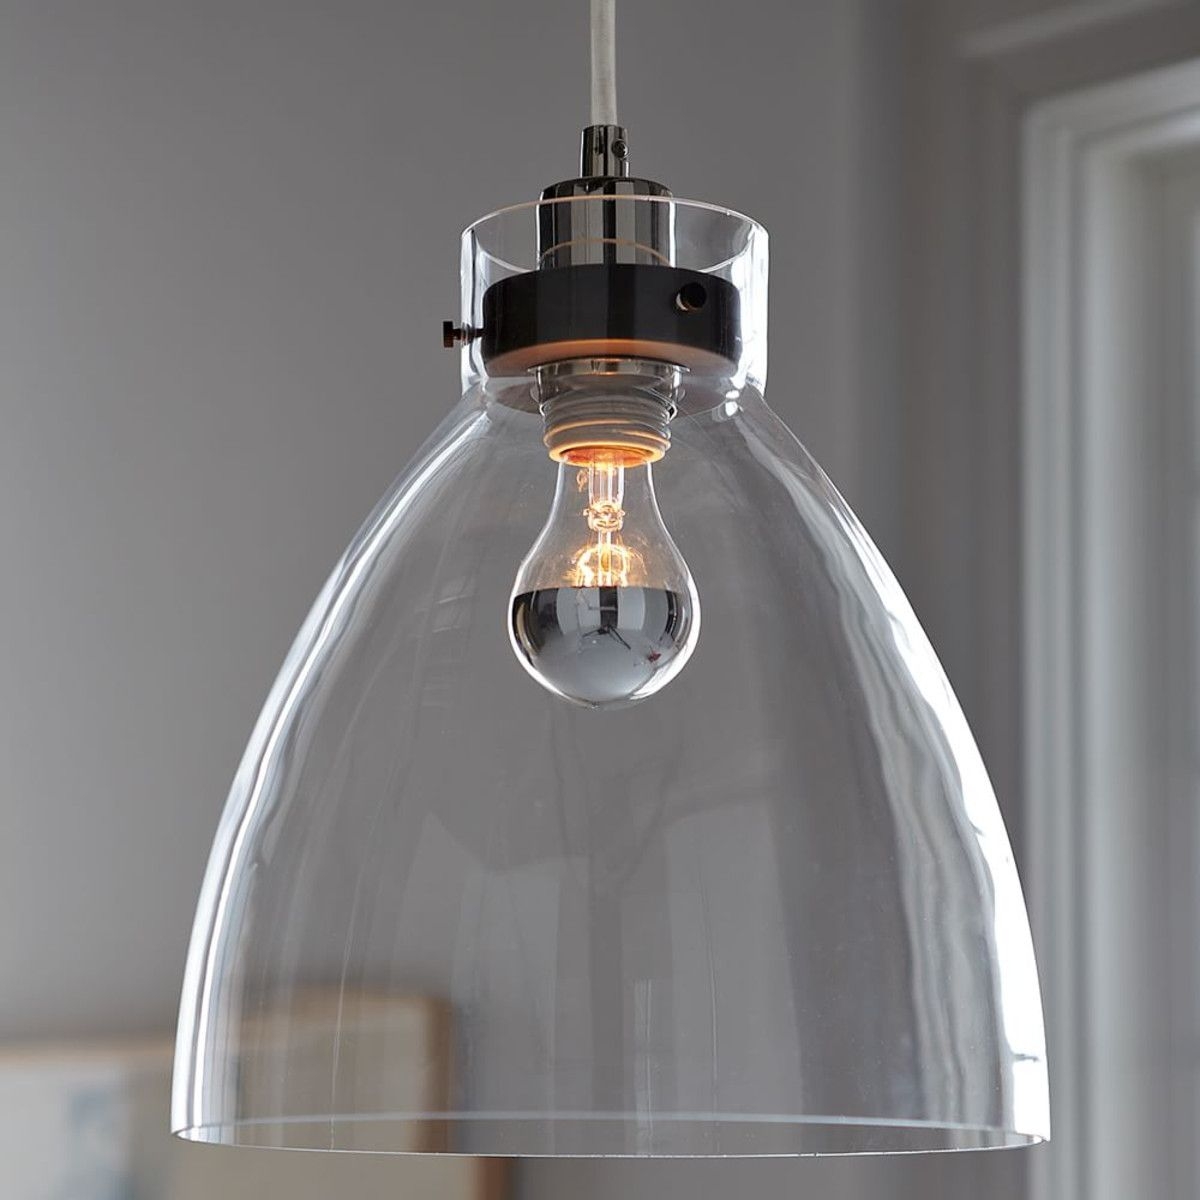 Minimalist glass pendant with an industrial design